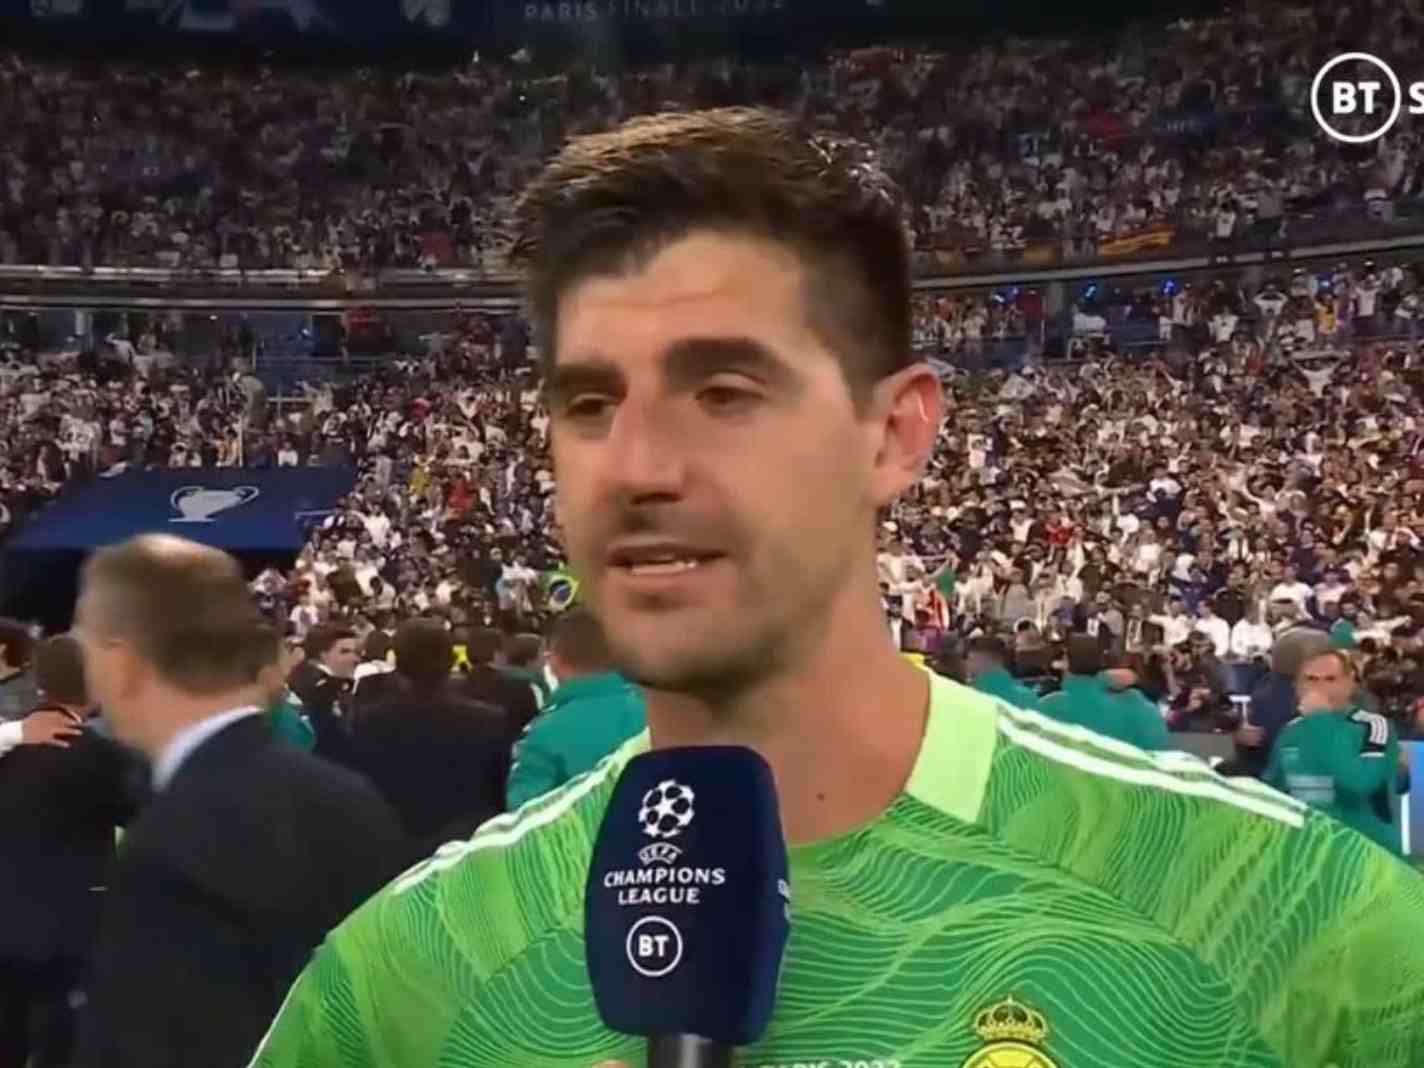 Thibaut Courtois hopes to ‘put some respect on his name’ after UCL final display